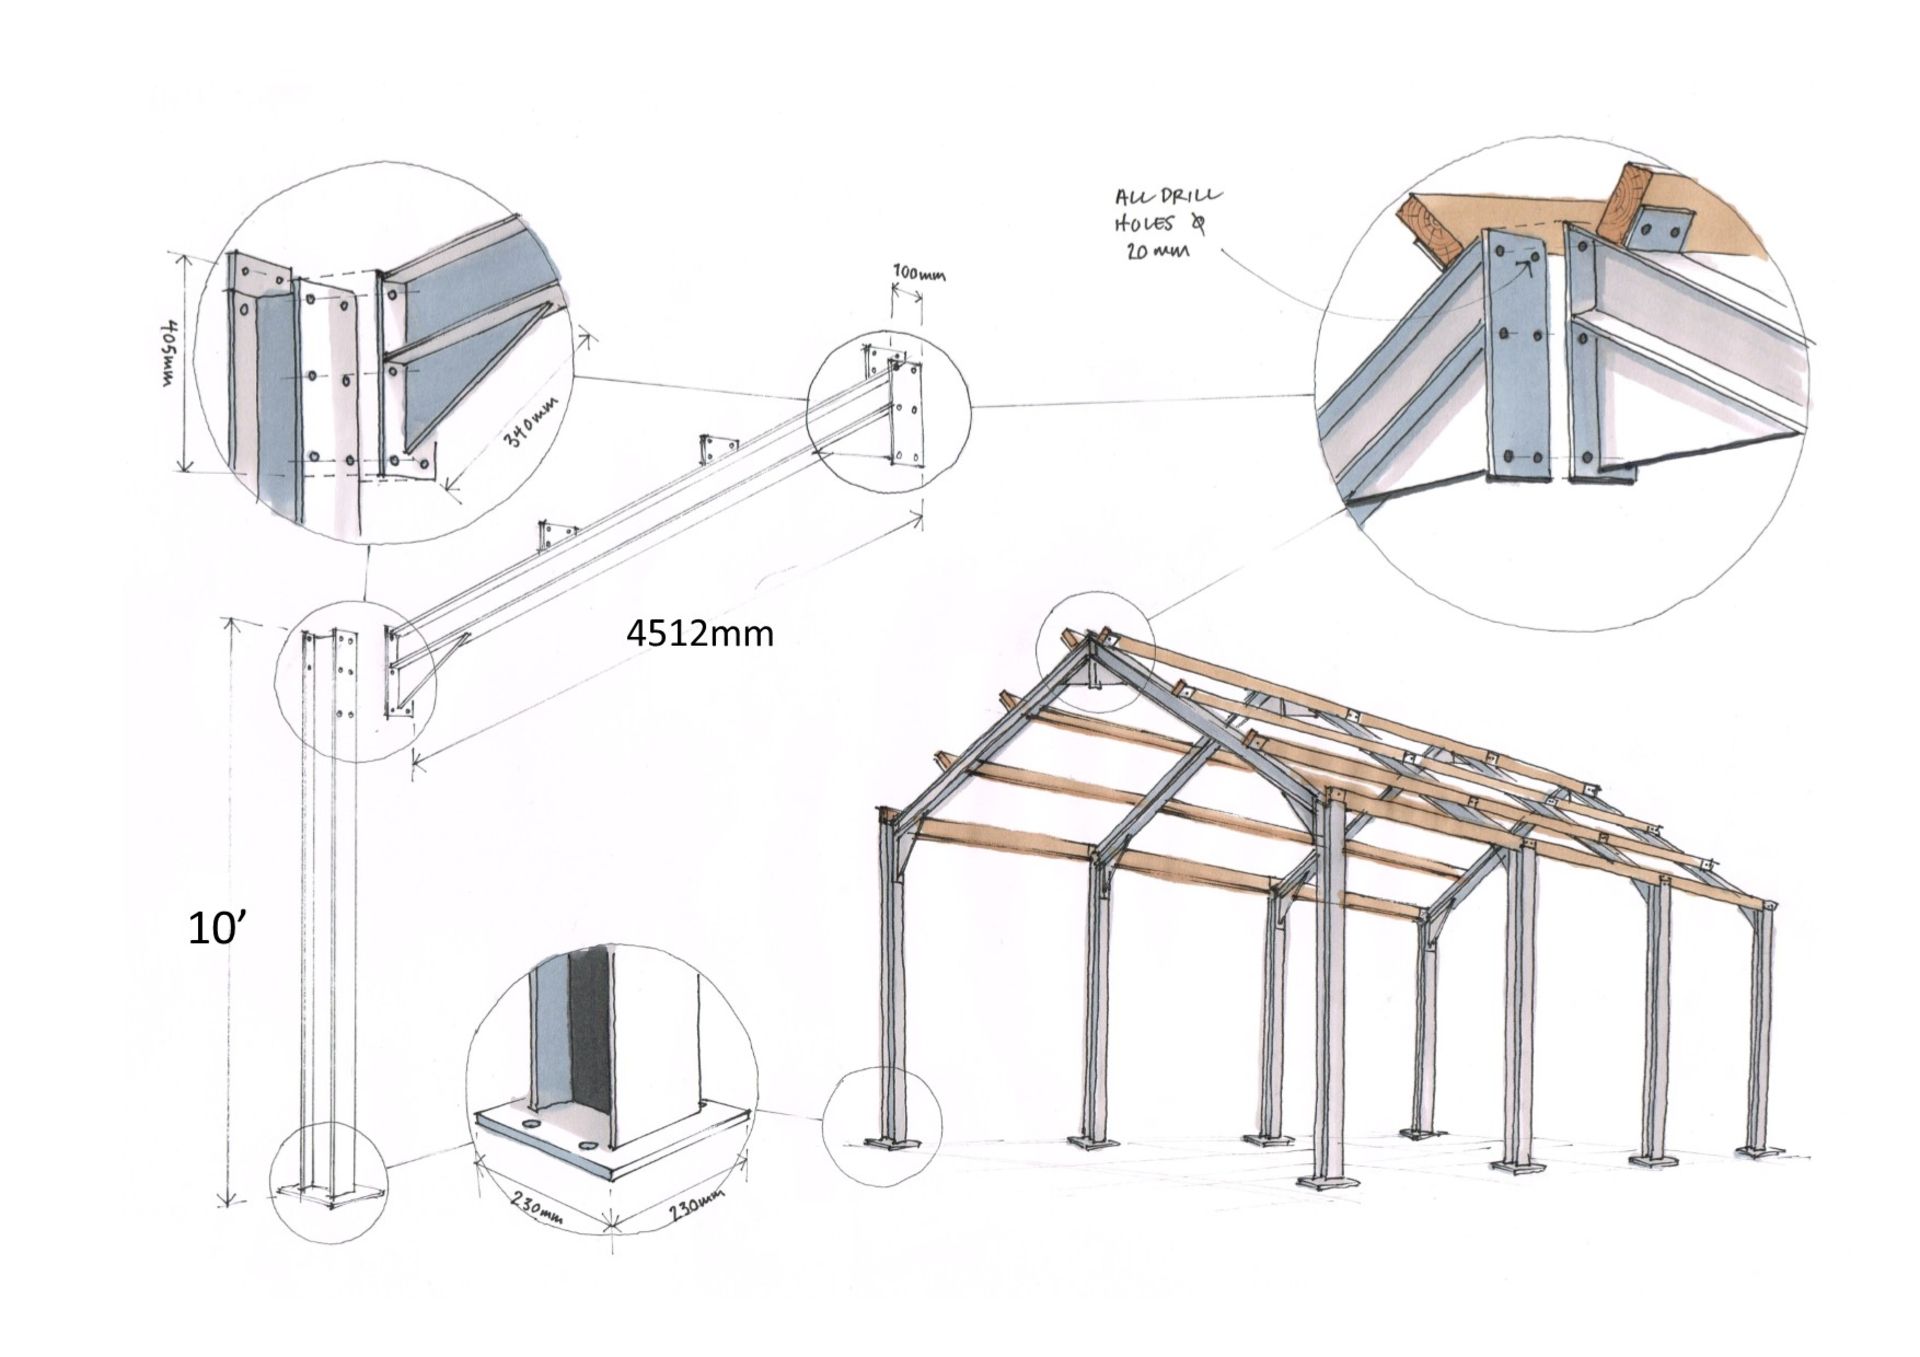 Steel framed building 30ft long x 30 ft wide x 10 ft @ eaves 12 .5 deg roof pitch purlins - Image 7 of 8